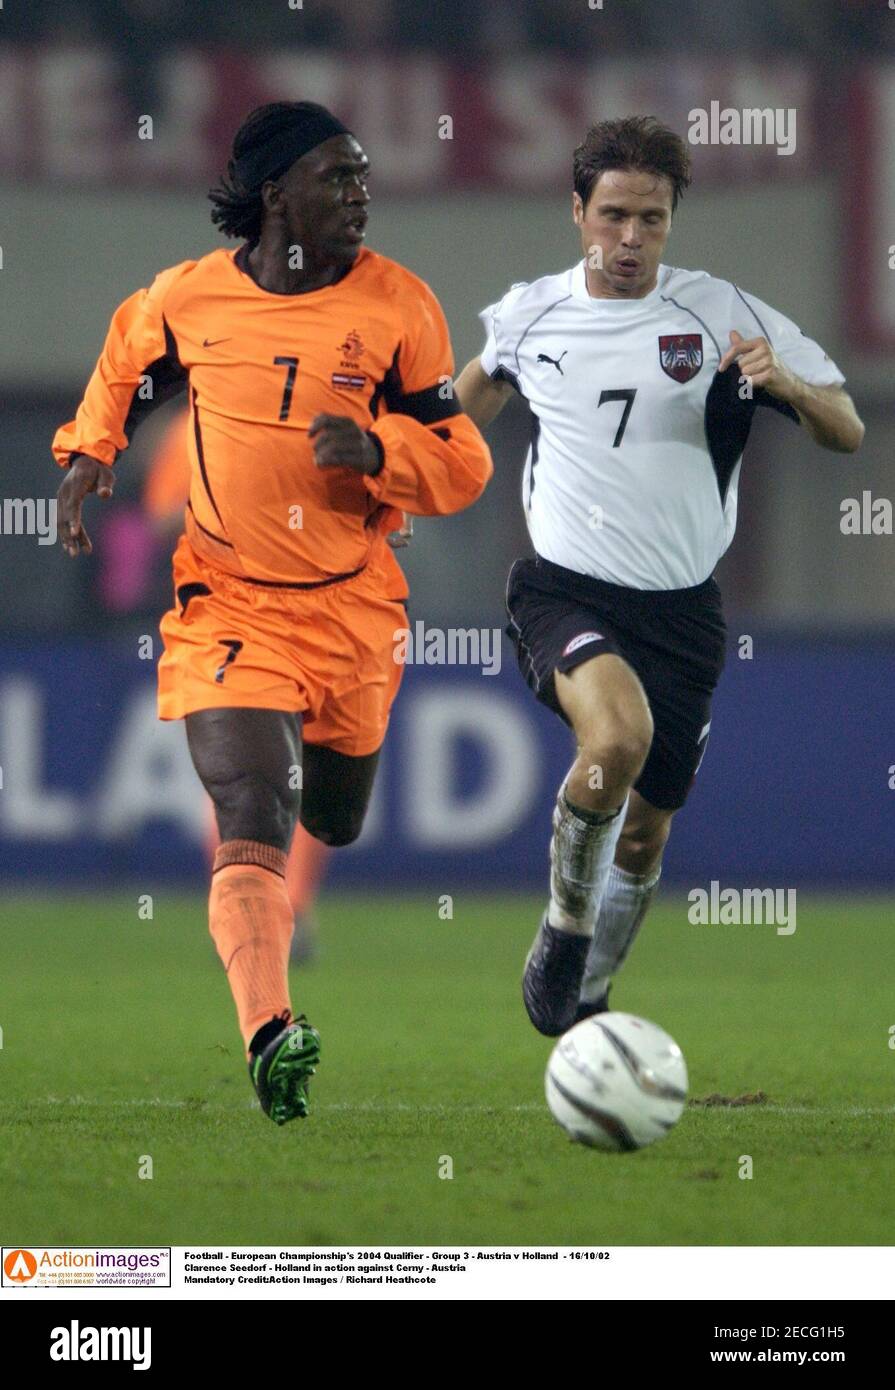 Football - European Championship's 2004 Qualifier - Group 3 - Austria v Holland  - 16/10/02  Clarence Seedorf - Holland in action against Harald Cerny - Austria  Mandatory Credit:Action Images / Richard Heathcote Stock Photo